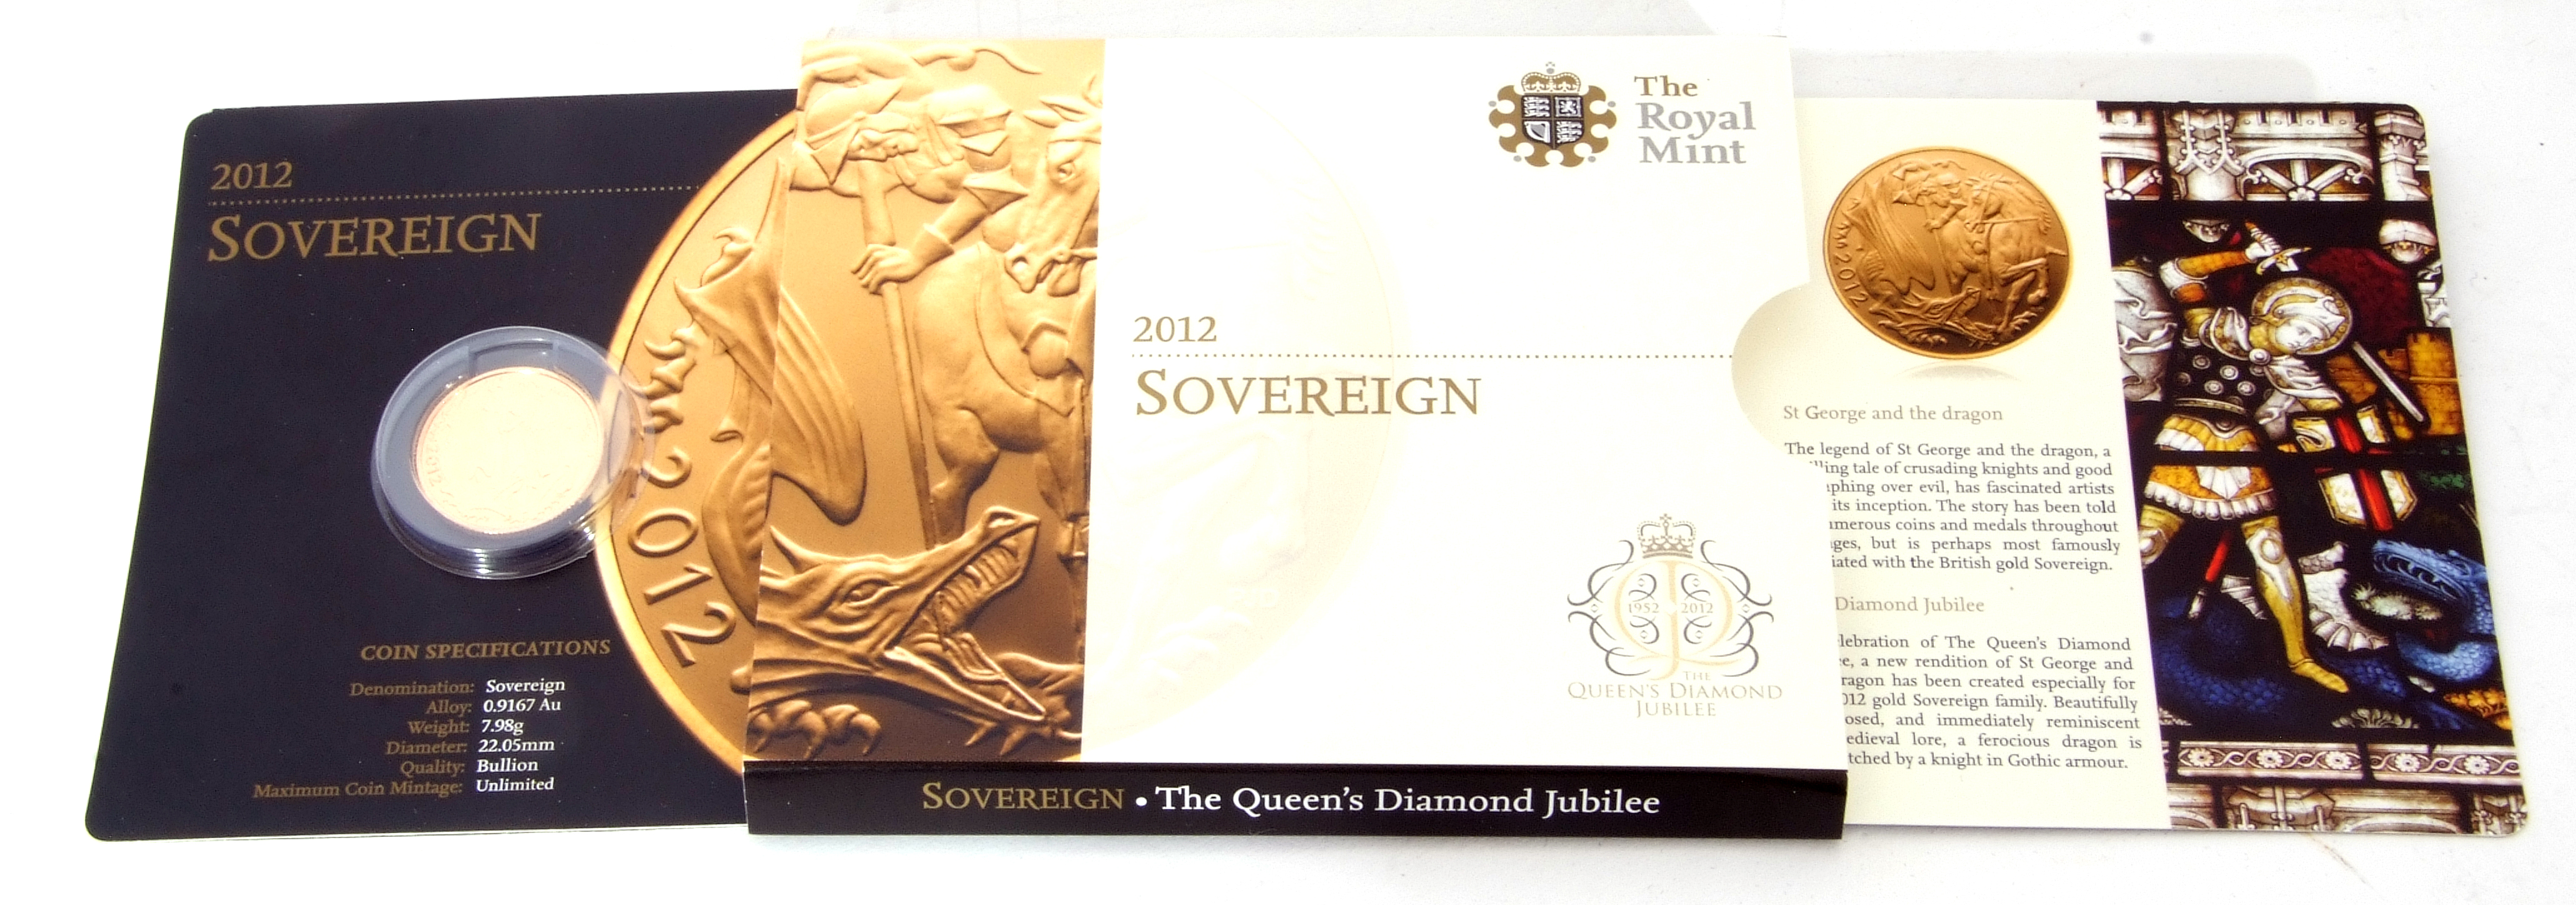 Elizabeth II gold "George and the Dragon" Diamond Jubilee sovereign 2012